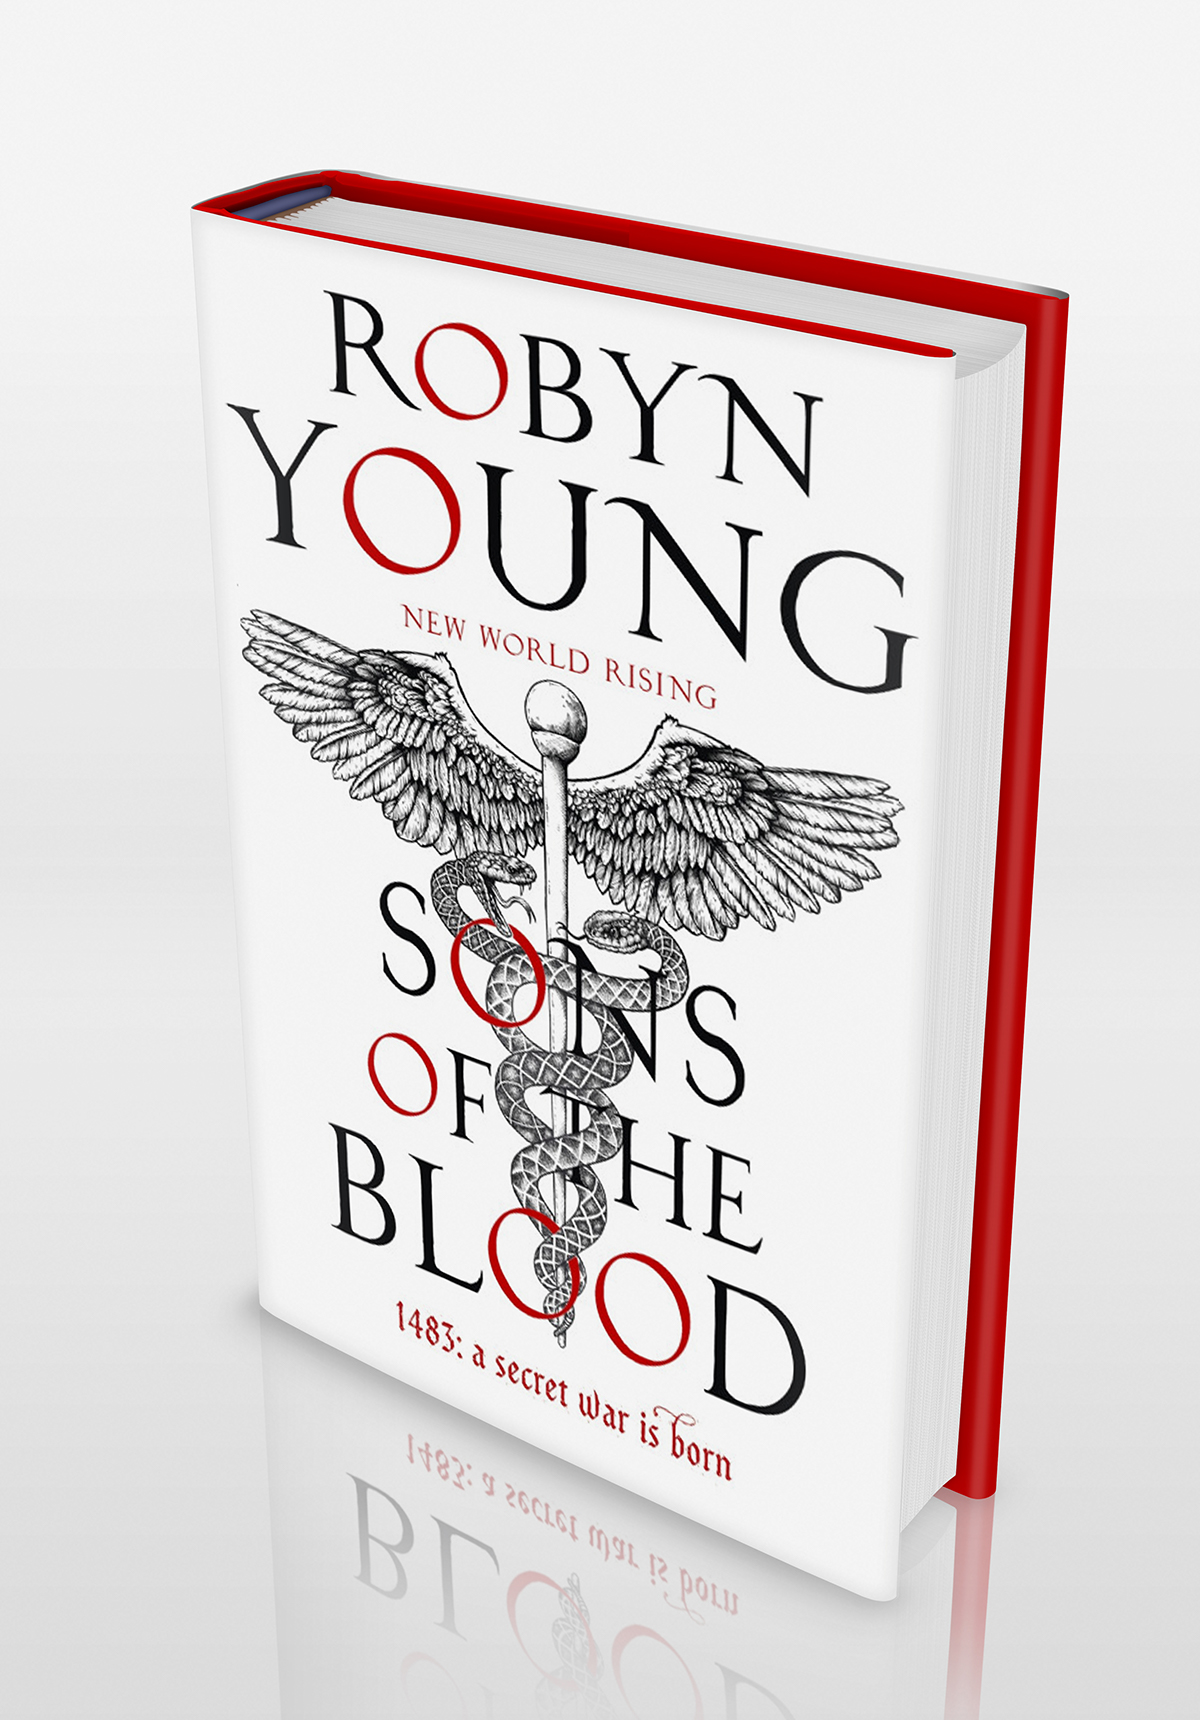 book cover publishing   history fiction novel Cover Art type blood snakes caduceus hand drawn pen pencil stipling detail